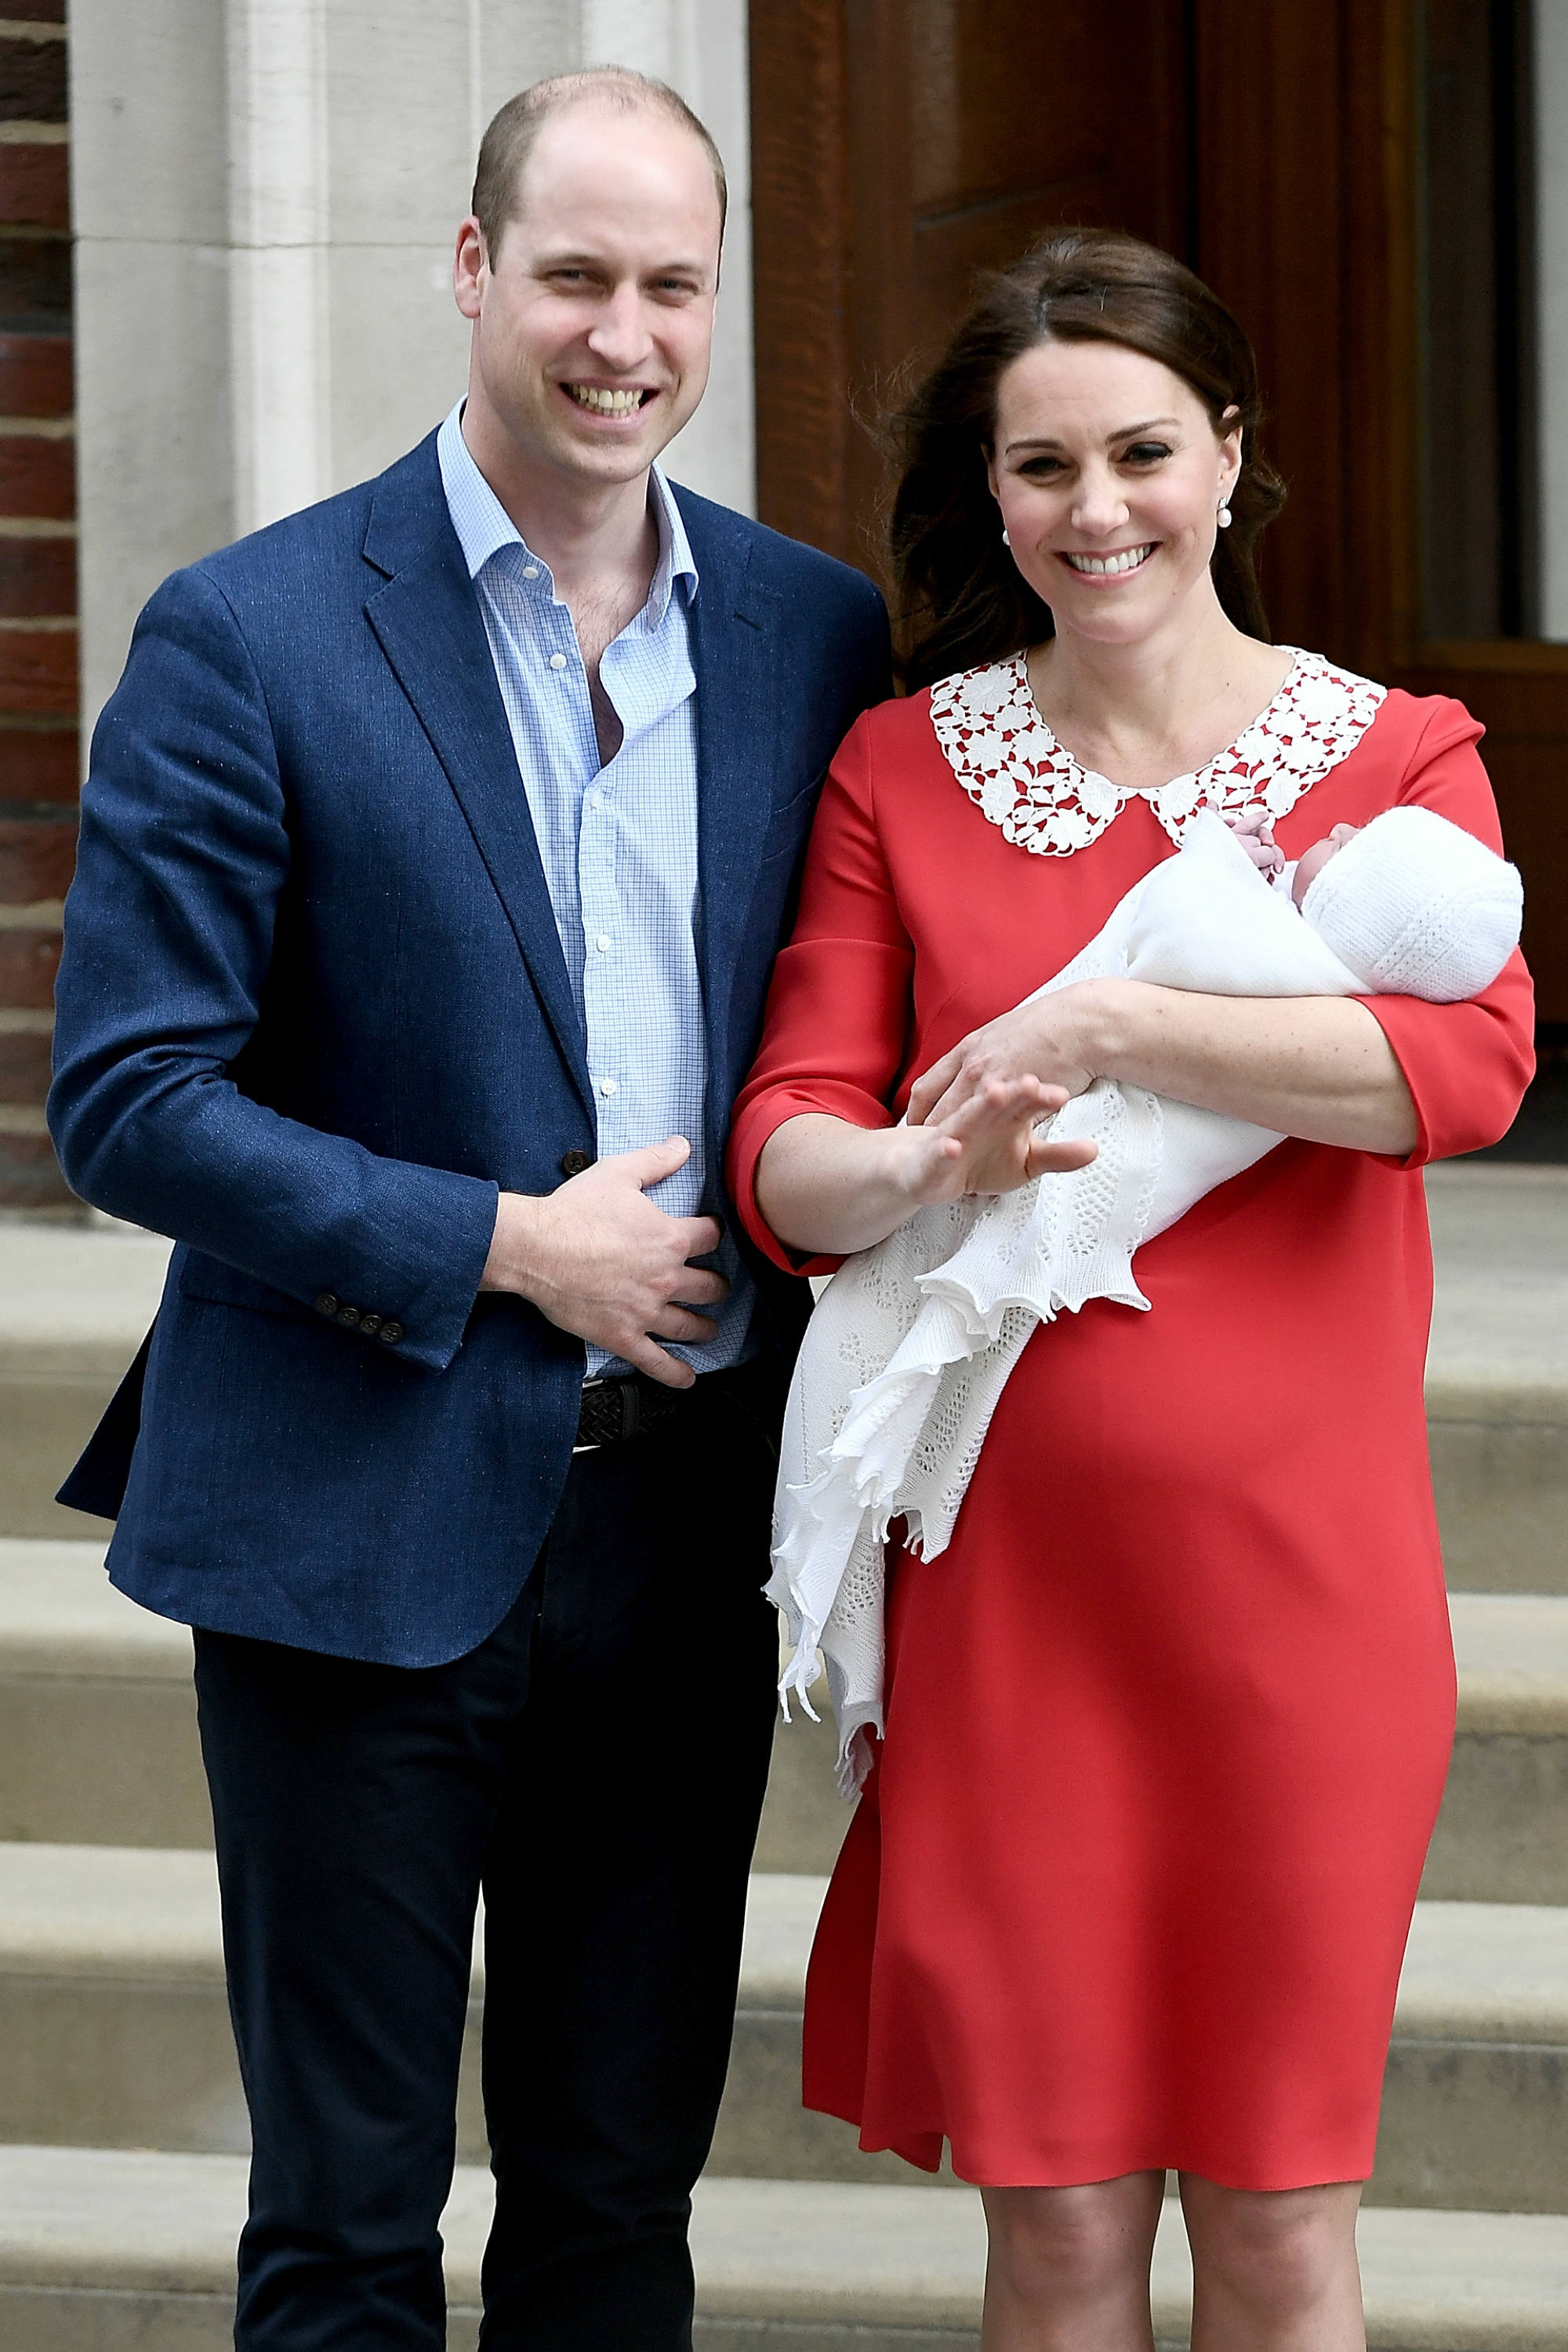 Prince William and Kate Middleton smile with the royal baby